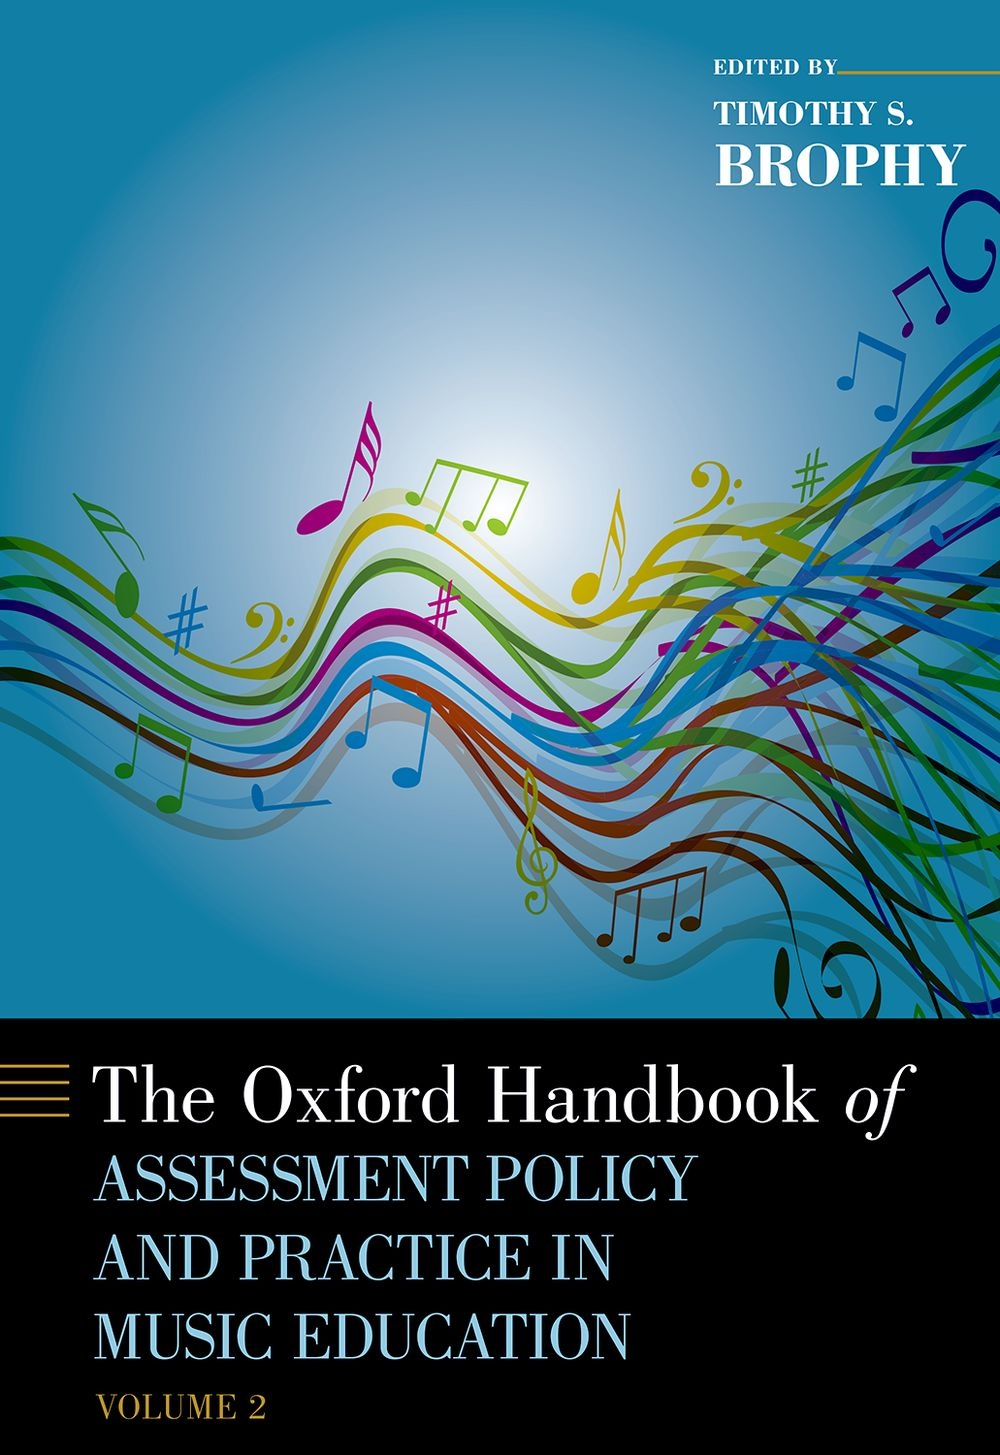 The Oxford Handbook of Assessment Policy  Vol. 2: Reference